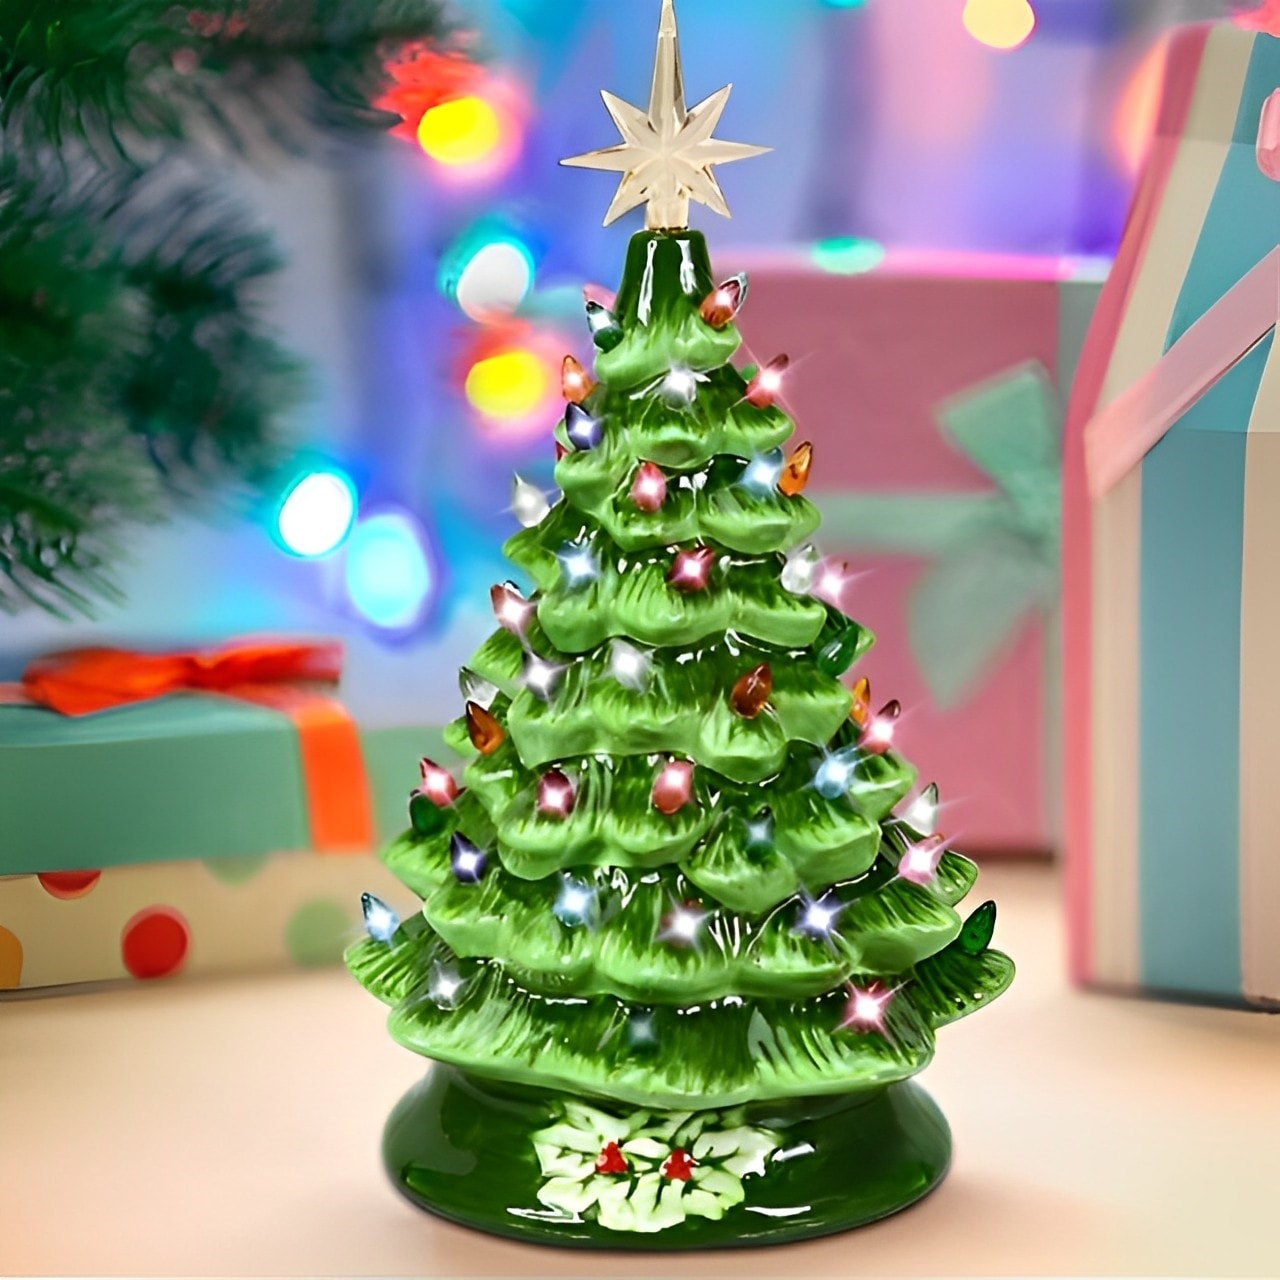 15'' Ceramic Christmas Tree, Lighted Artificial Christmas Decoration Hand Painted Lighted Tree with Star